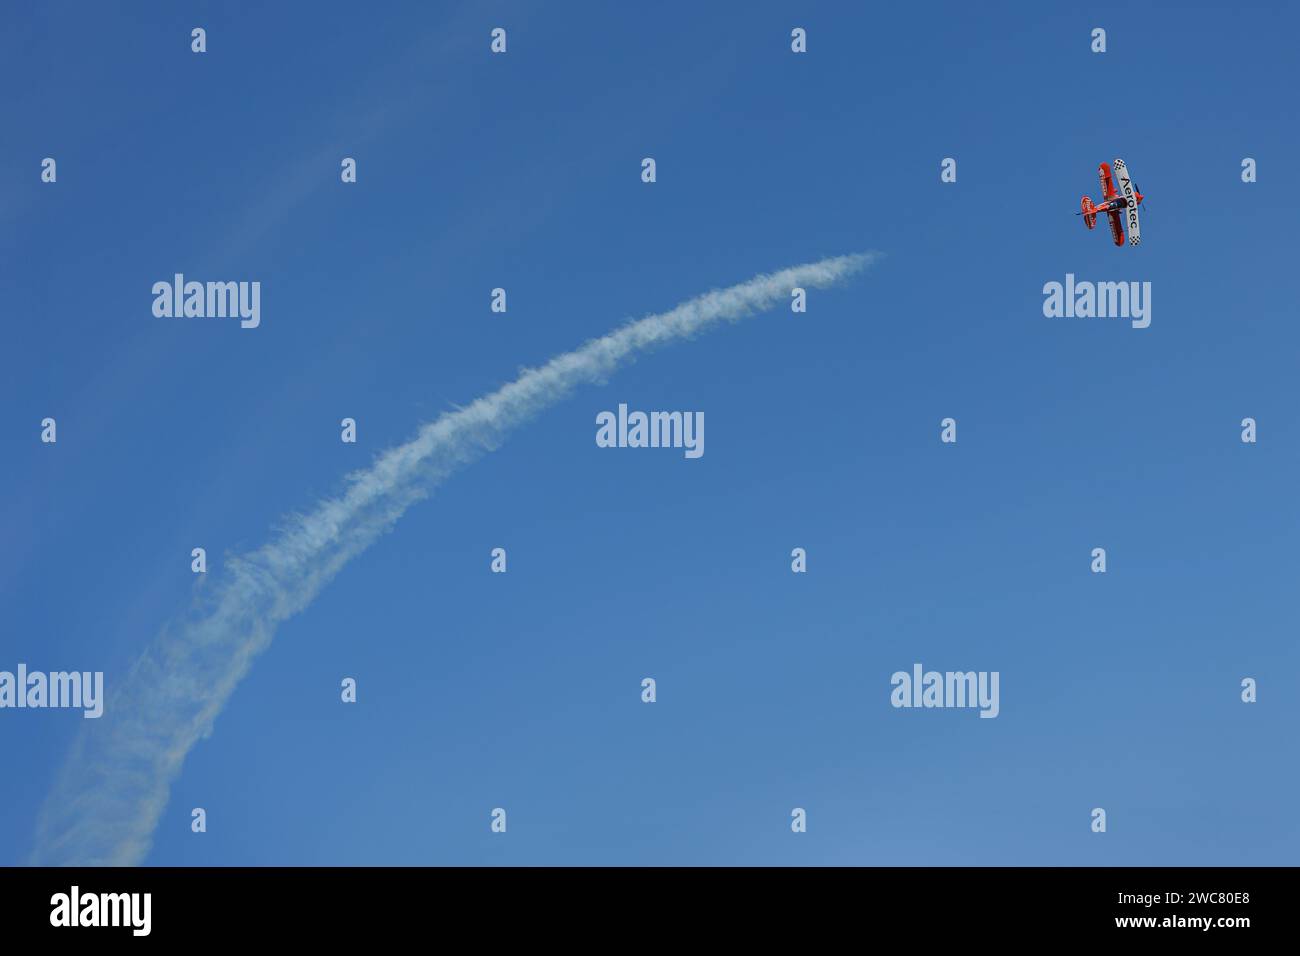 Mar del Plata, Argentina - January 14th, 2023: Biplane airplane doing stunts in the sky and releasing smoke. Stock Photo